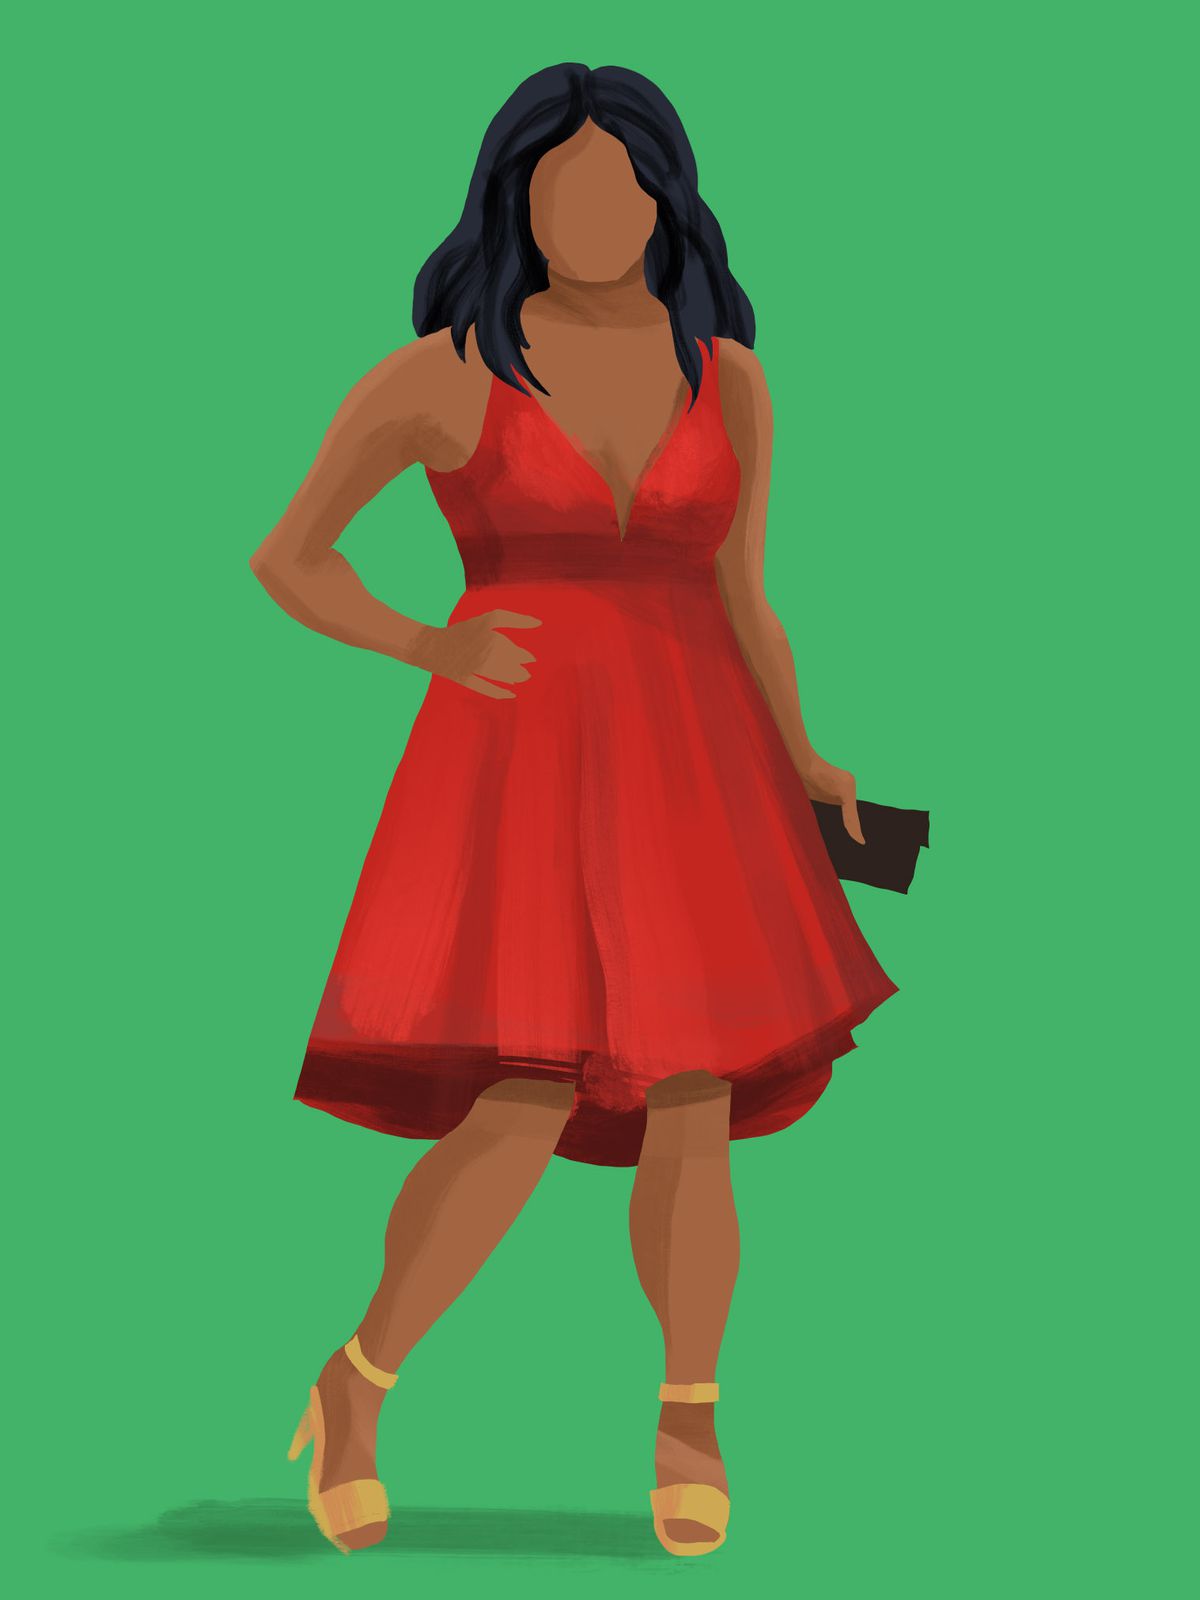 an illustration of a black woman in a red dress and gold heels